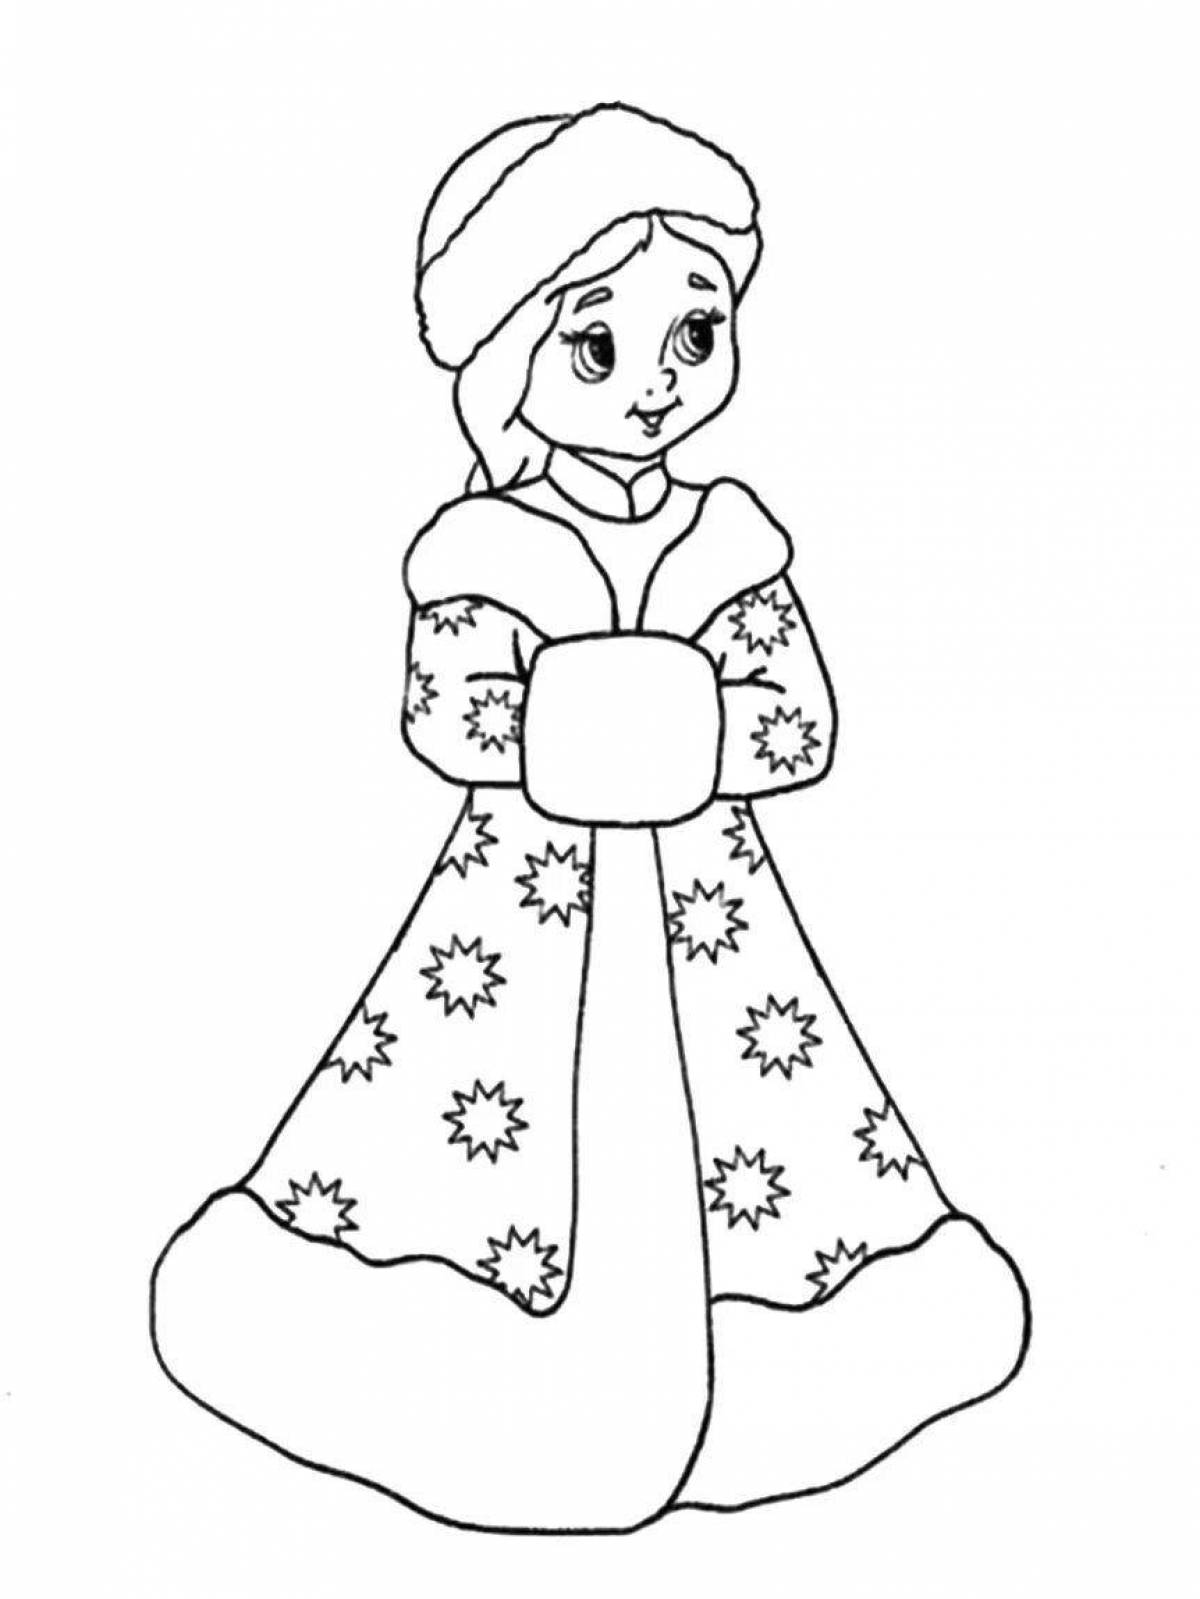 Glowing coloring drawing snow maiden